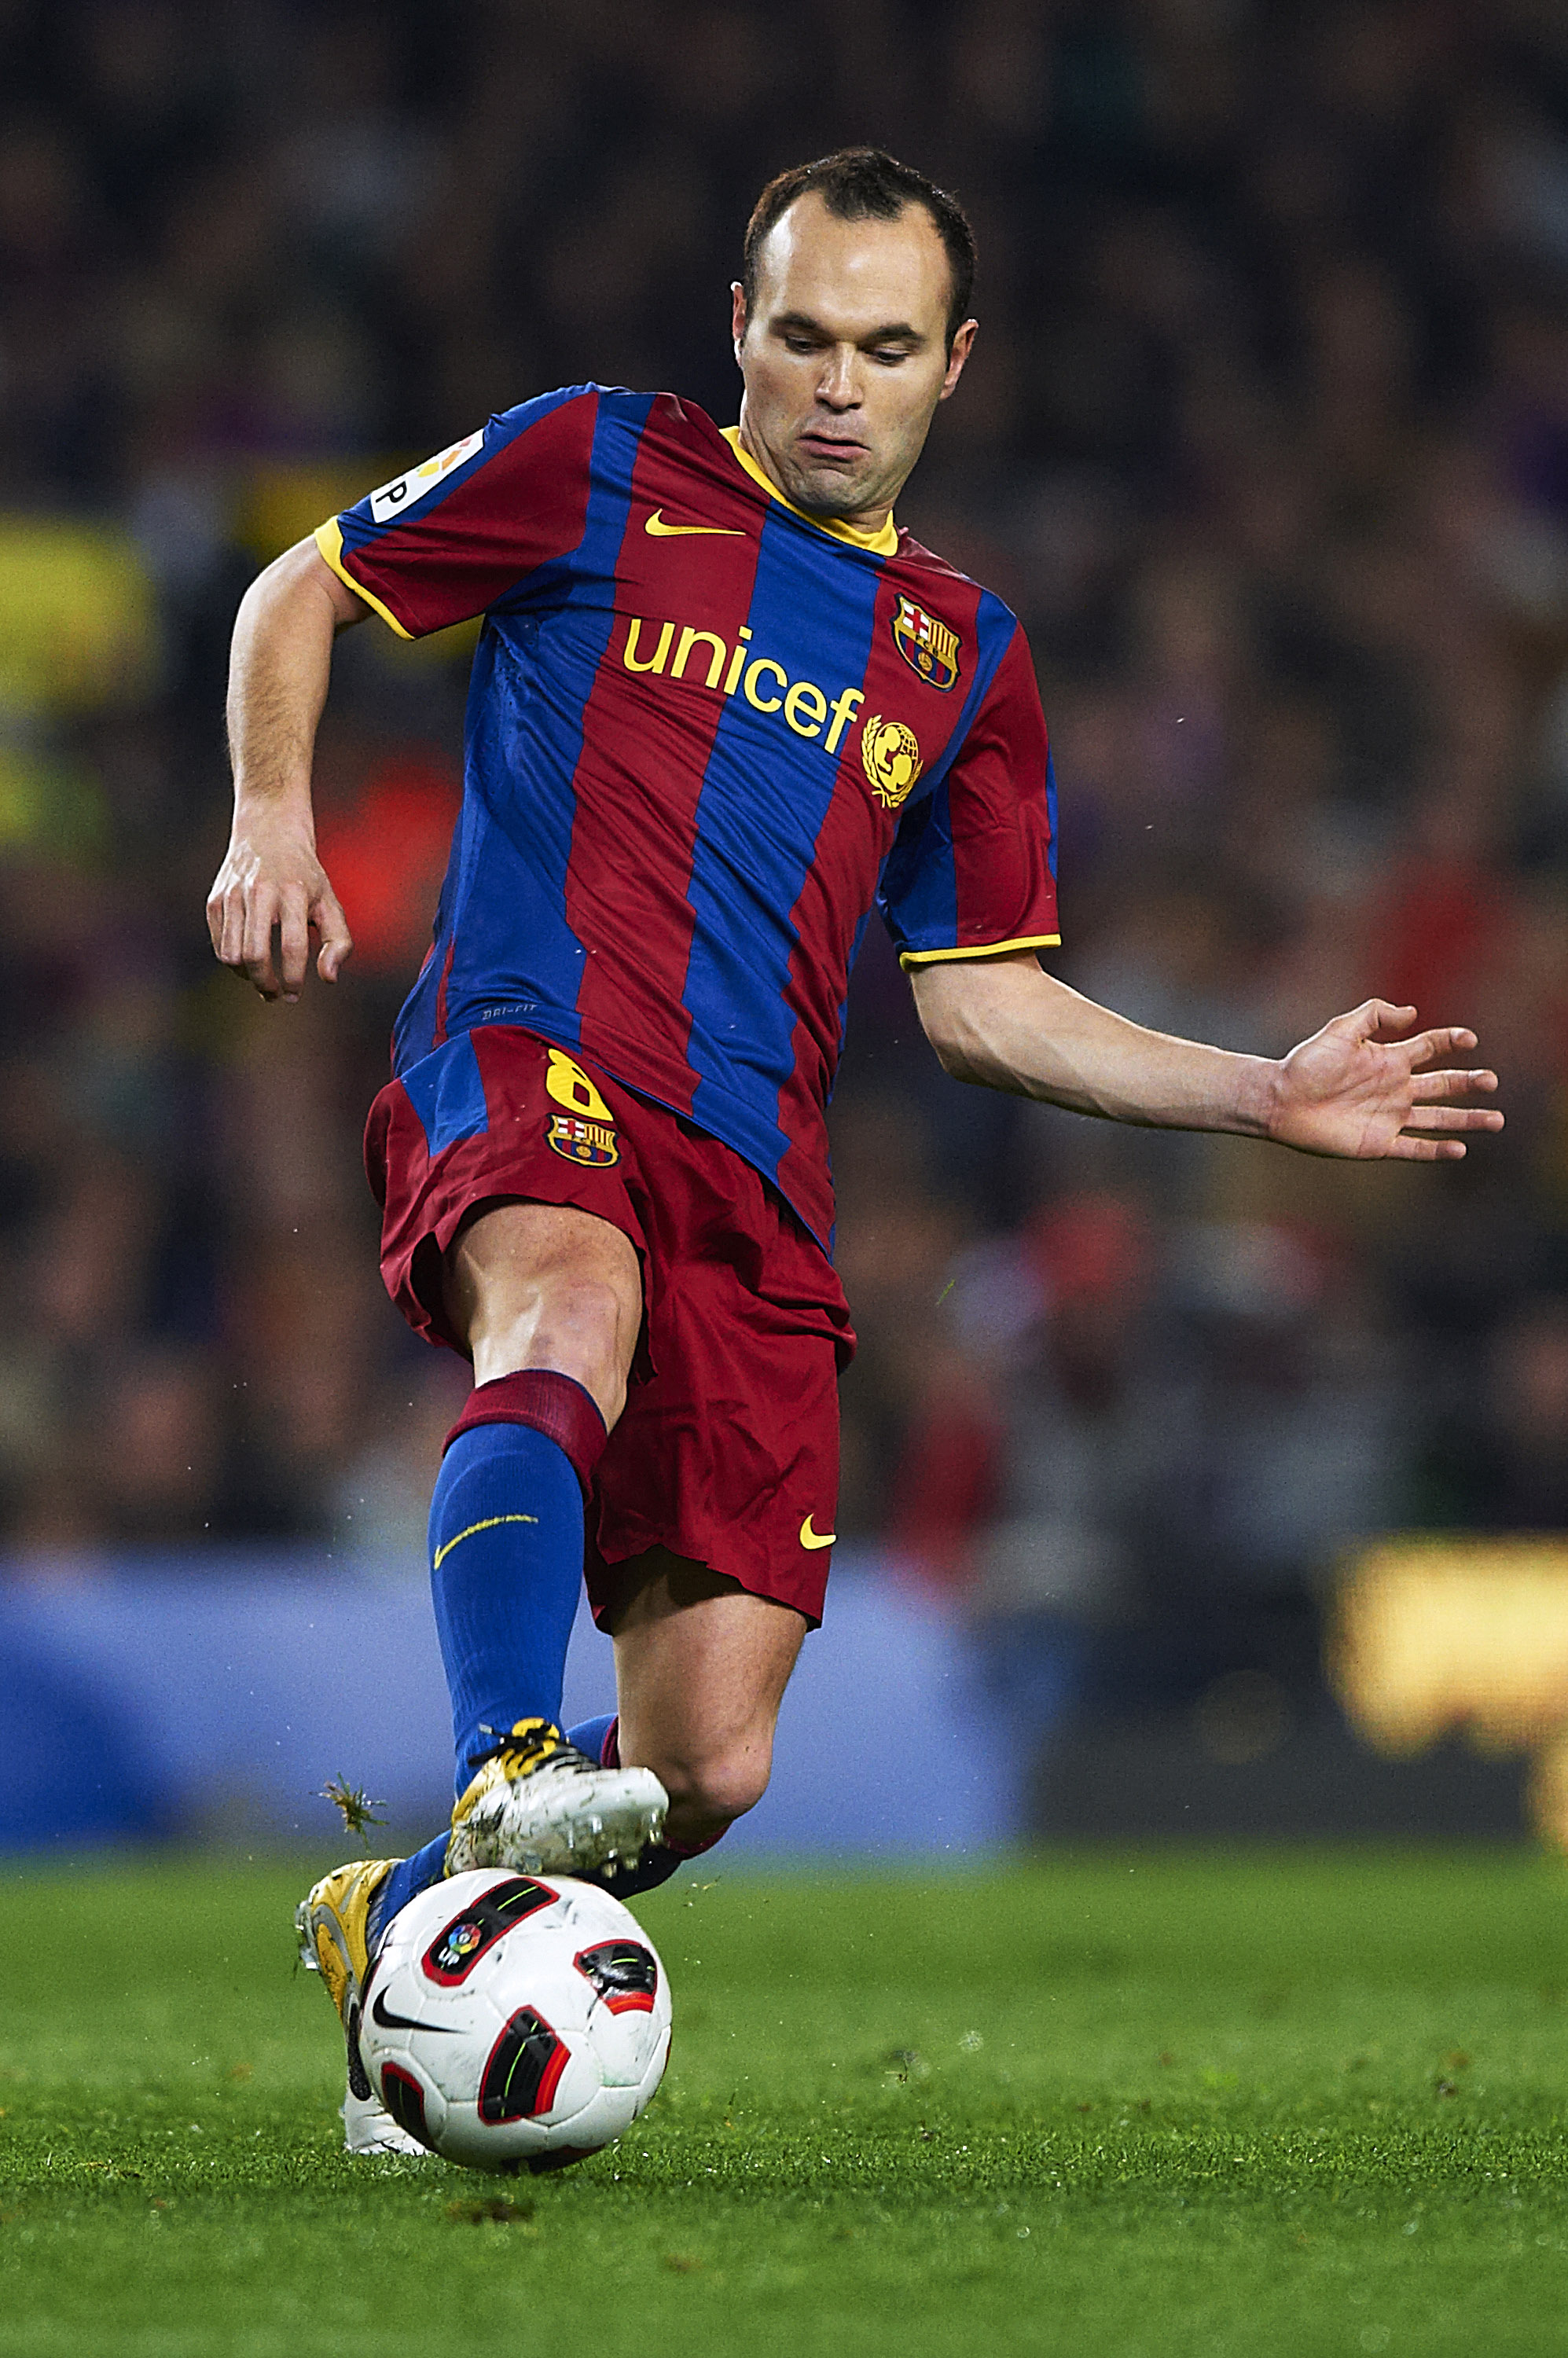 BARCELONA, SPAIN - MARCH 19:  Andres Iniesta of Barcelona controls the ball during the La Liga match between Barcelona and Getafe at Camp Nou on March 19, 2011 in Barcelona, Spain.  (Photo by Manuel Queimadelos Alonso/Getty Images)